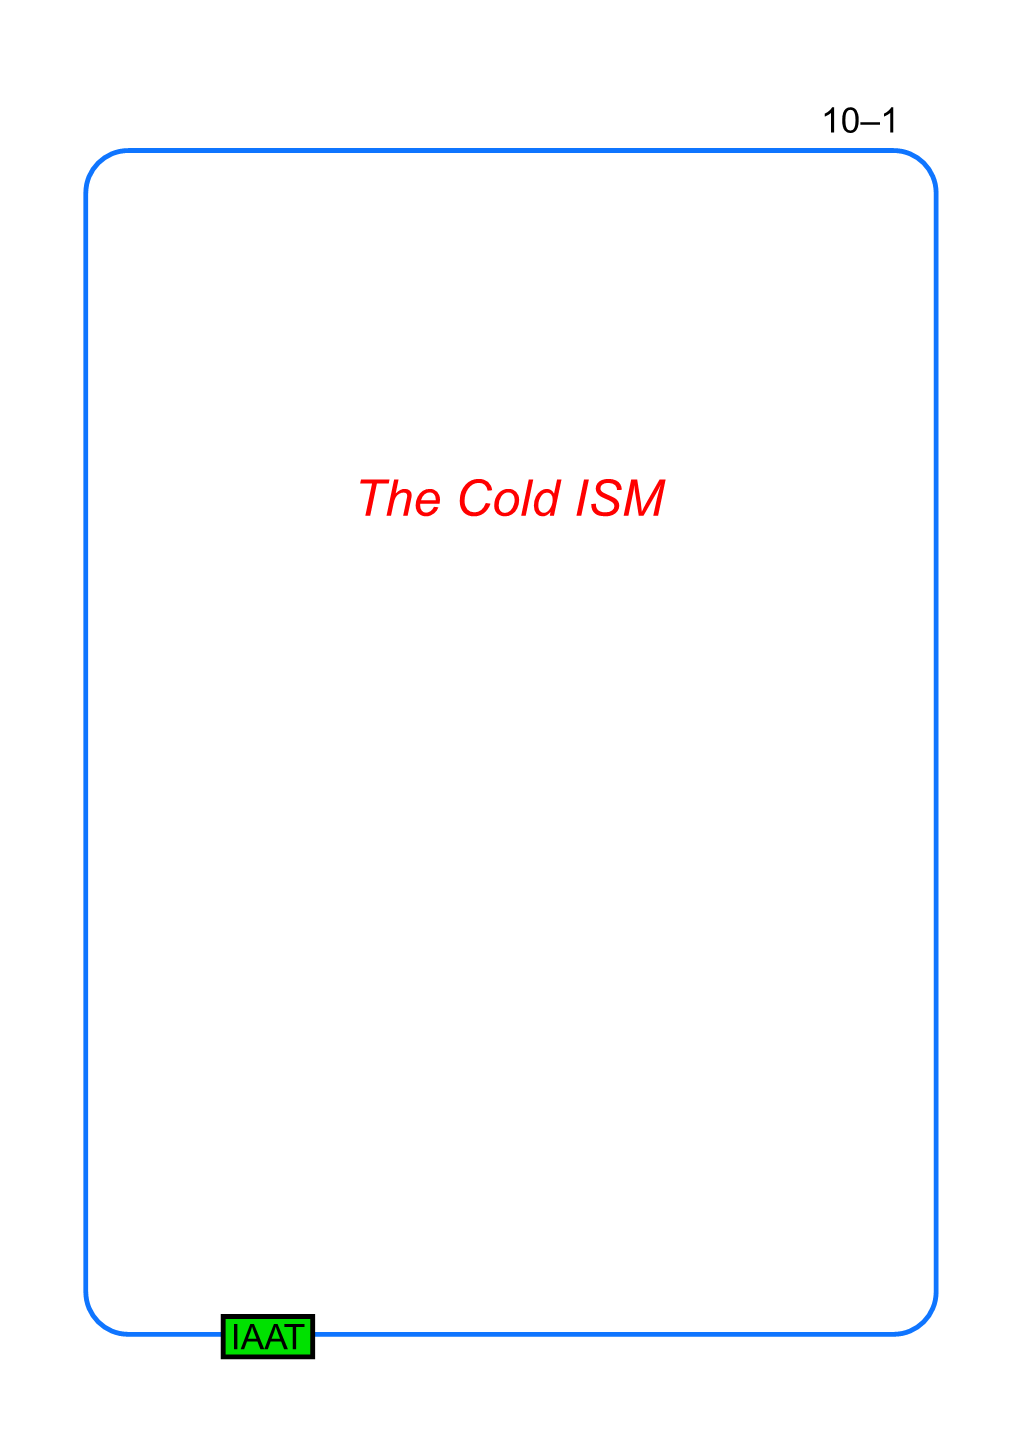 The Cold ISM